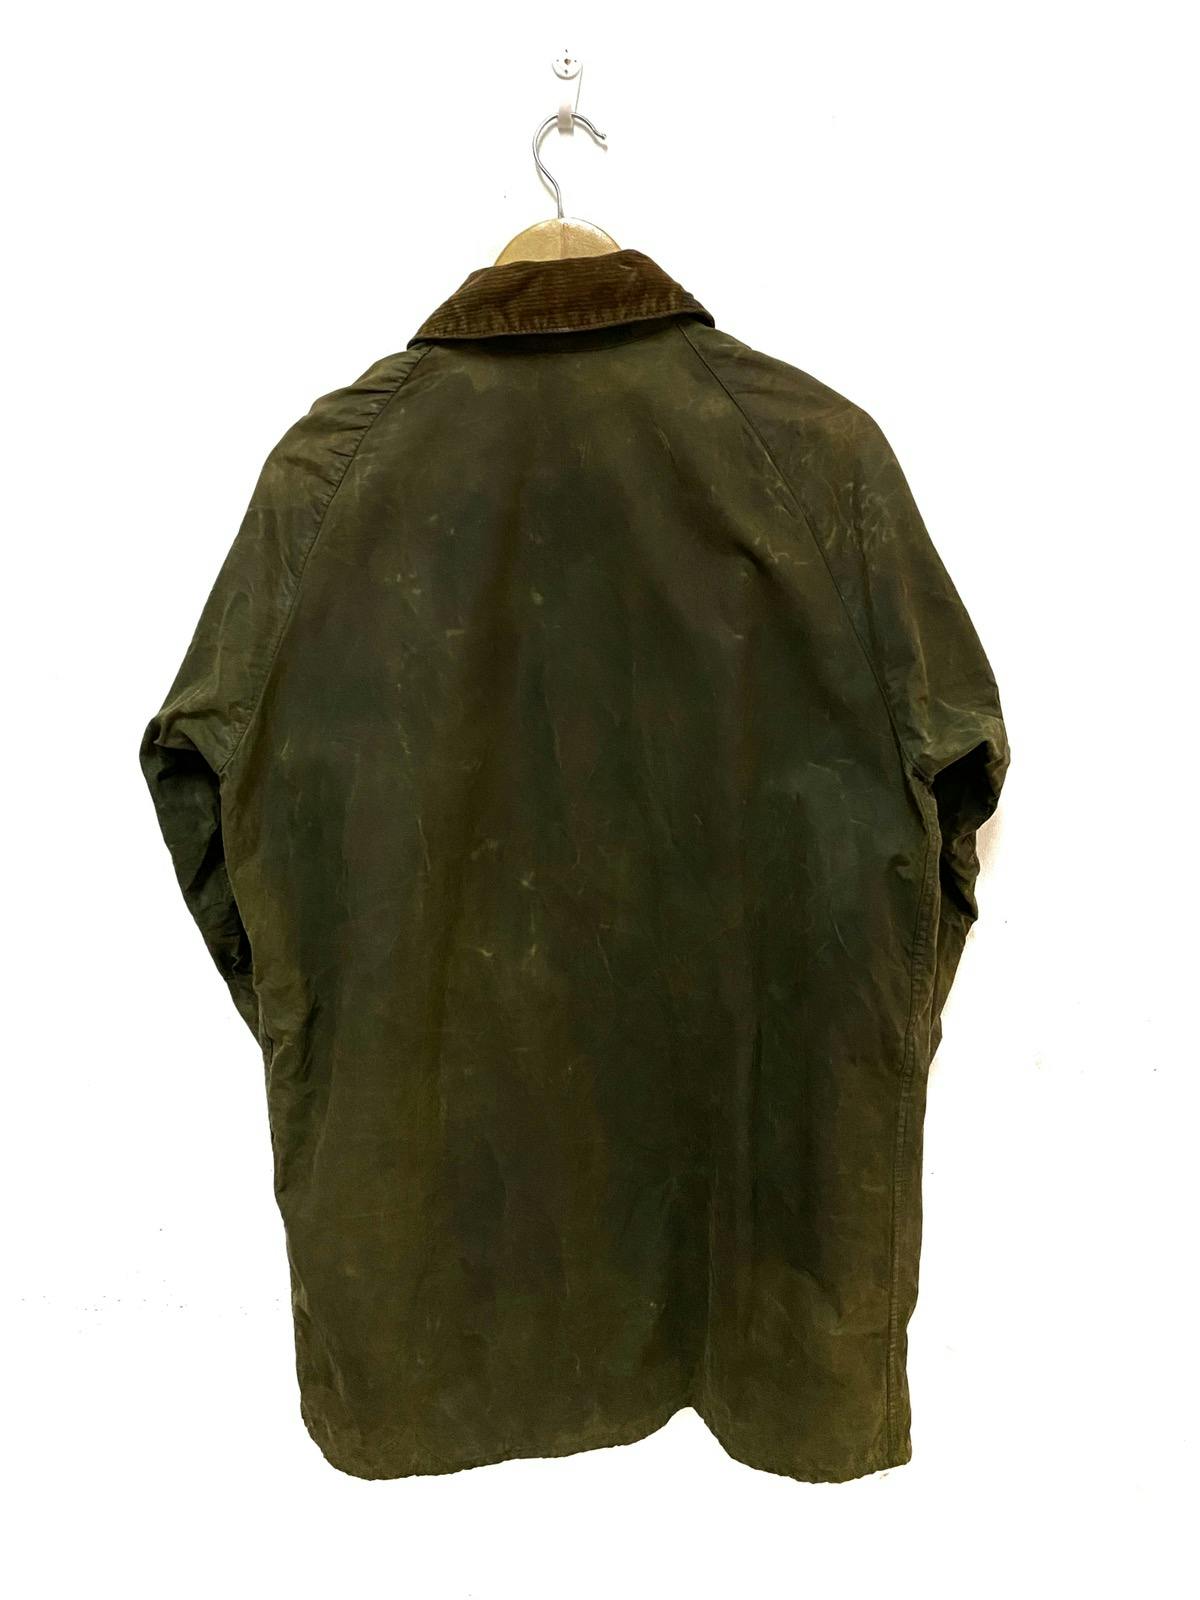 Barbour Gamefair Waxed Jacket Made in England - 9